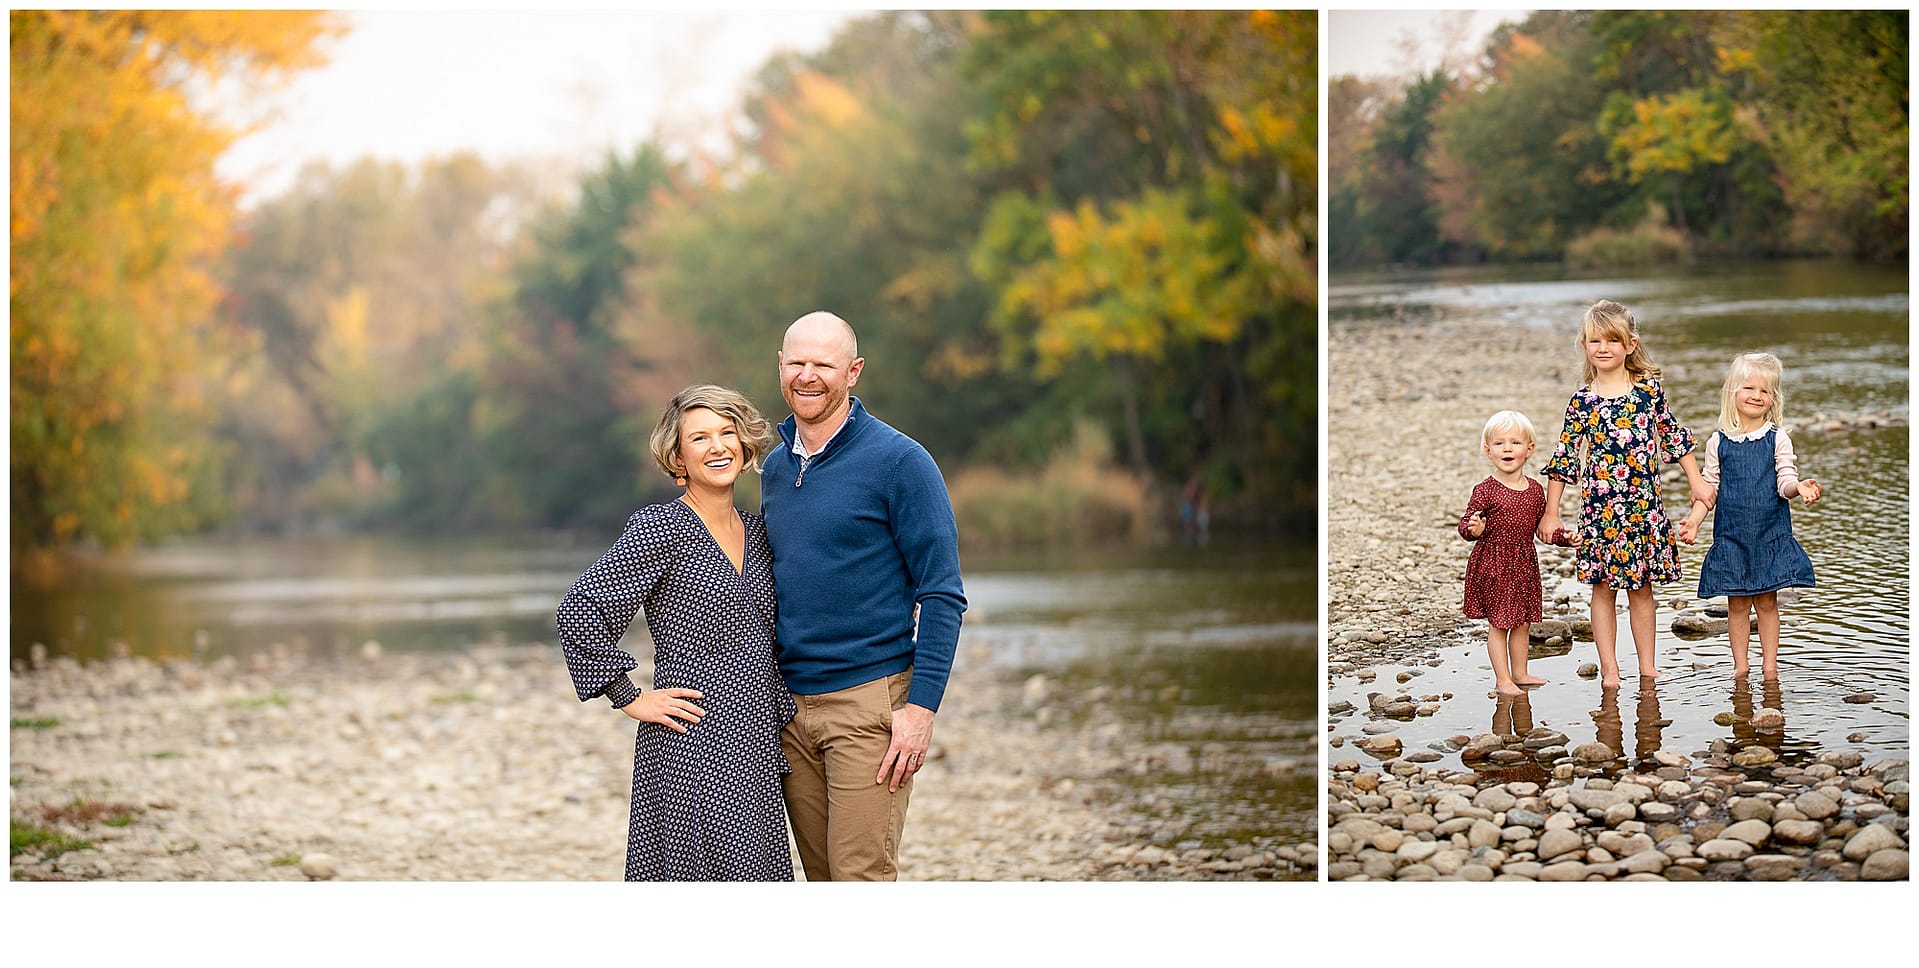 Mom and dad pose together. Photo by Tiffany Hix Photography.